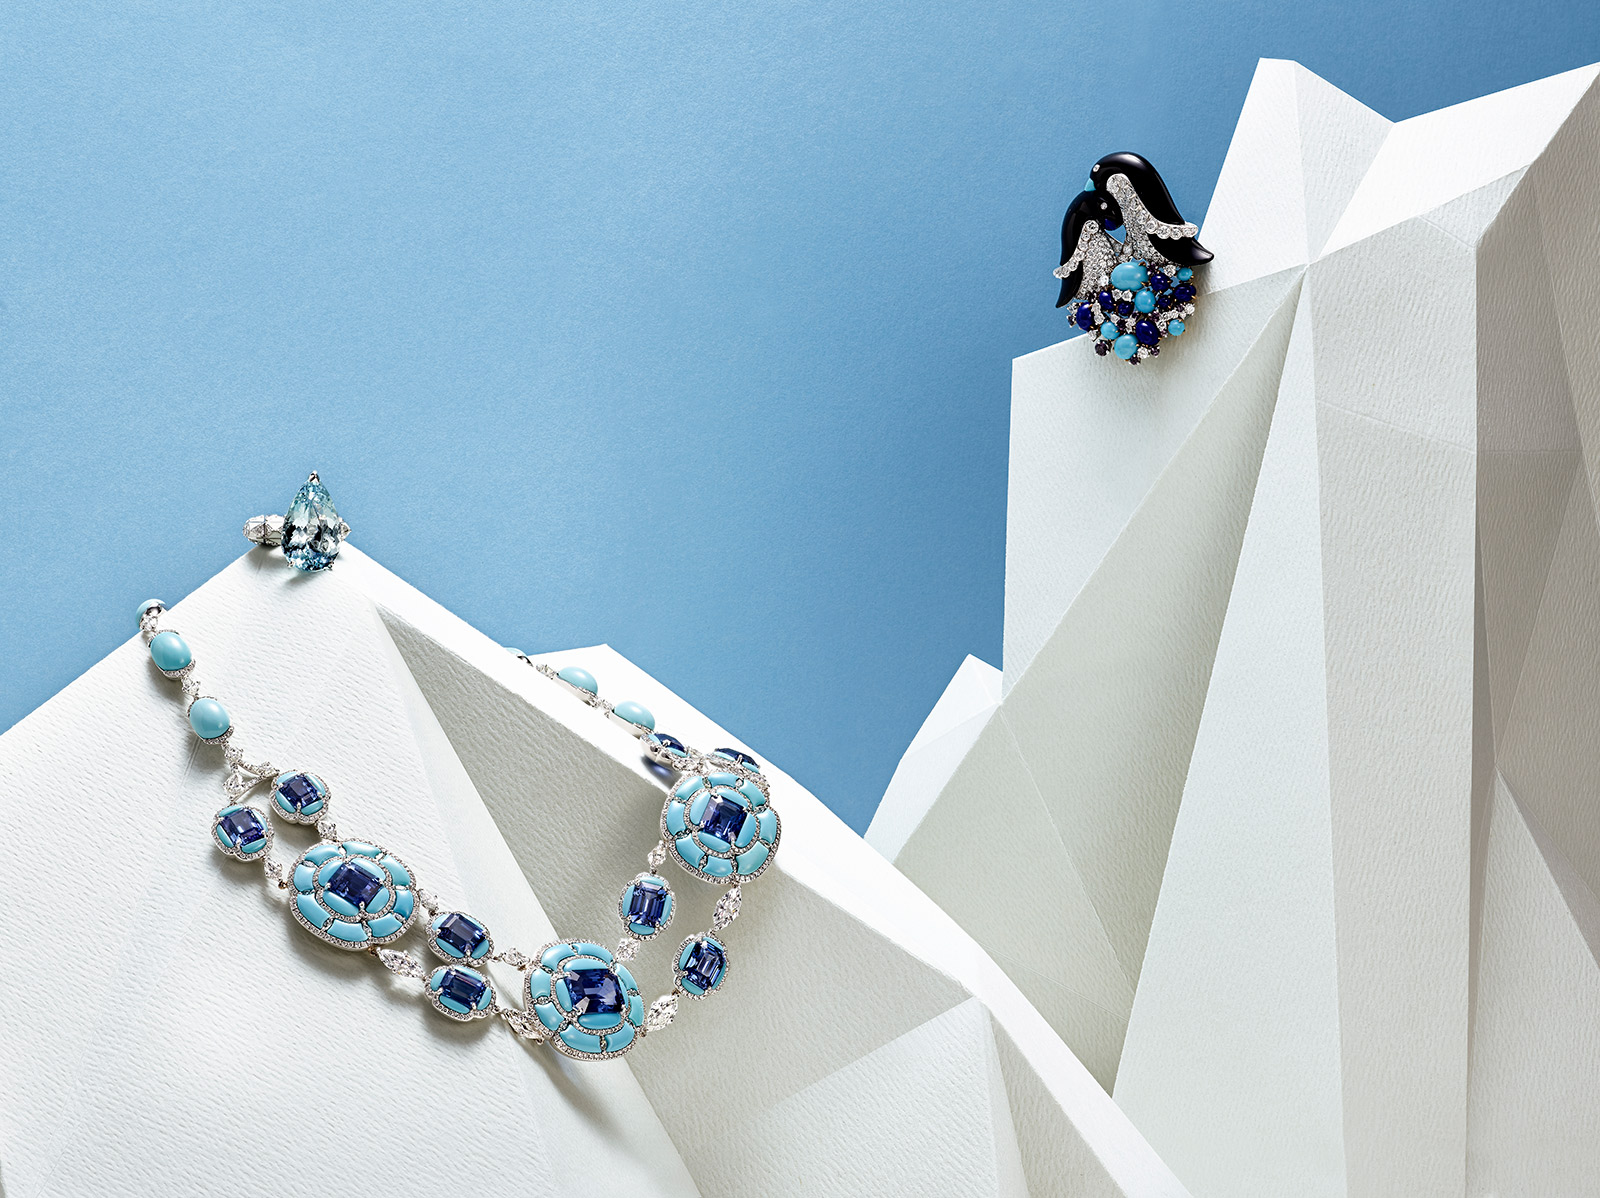 From left to right: Boghossian necklace with ceylon sapphires, turquoise and diamonds in white gold, Sarah Ho 'Pear Drop' ring with 16.30ct aquamarine, diamonds and white enamel on white gold, Van Cleef&Arpels 'Penguins' clip with turquoise, lapis lazuli, sapphires, onyx and diamonds in yellow and white gold